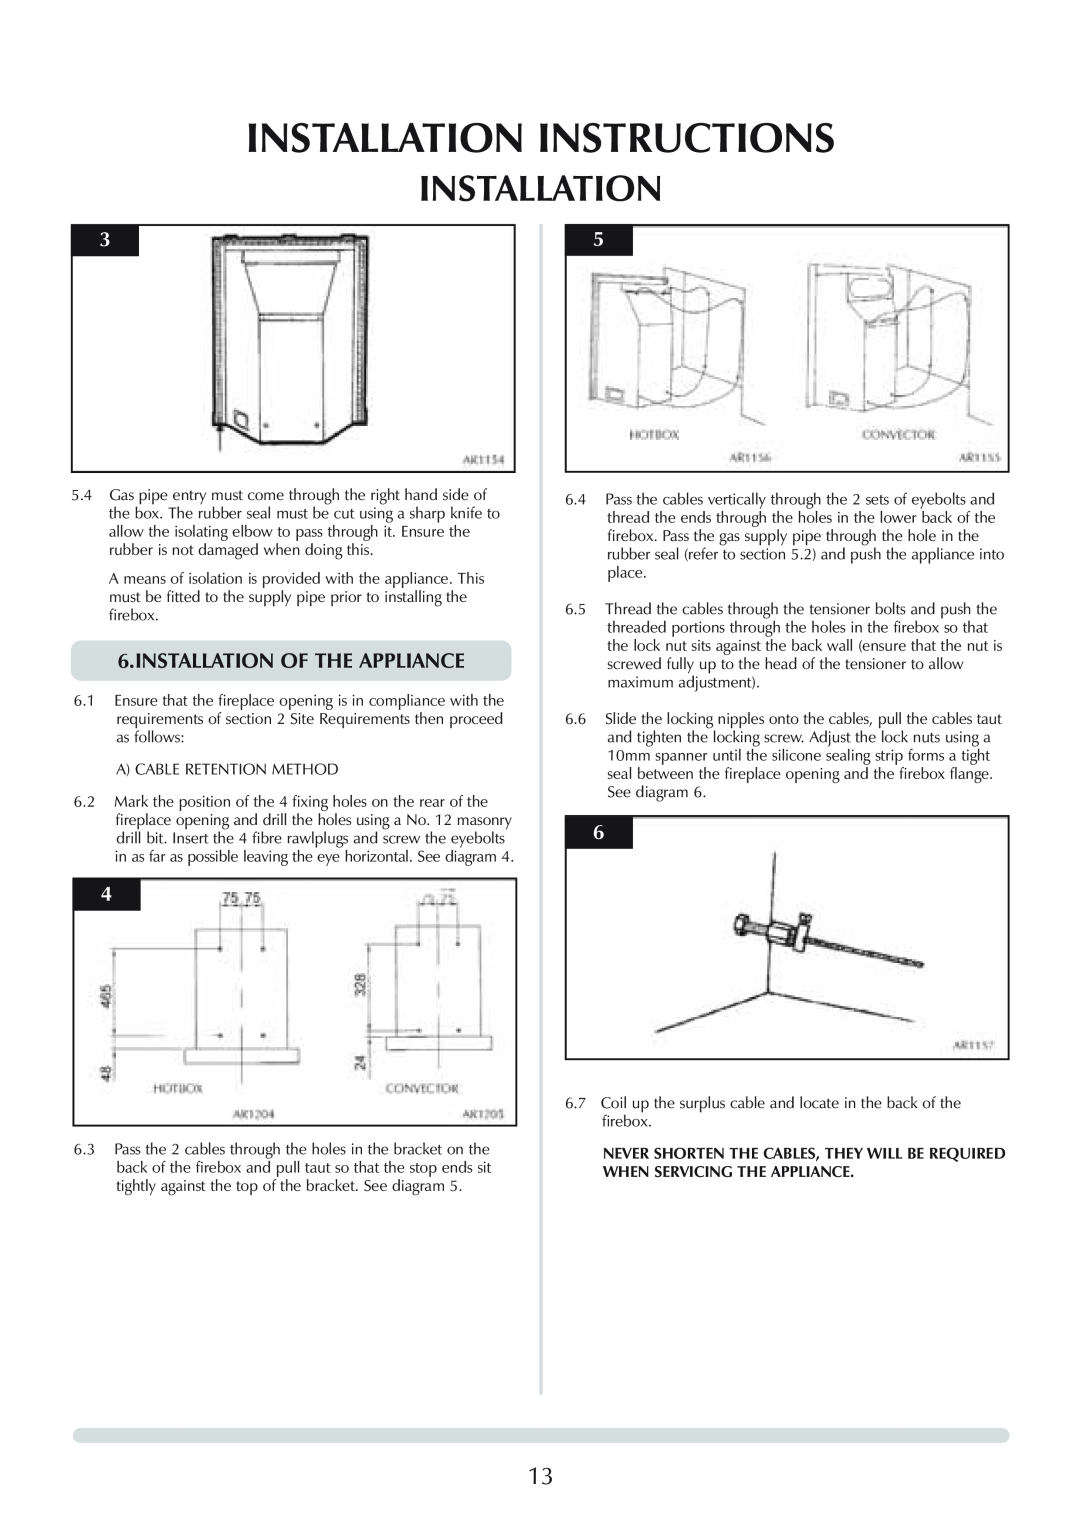 Stovax Logic Hotbox & Convector Fire manual Installation Instructions, Installation Of The Appliance 